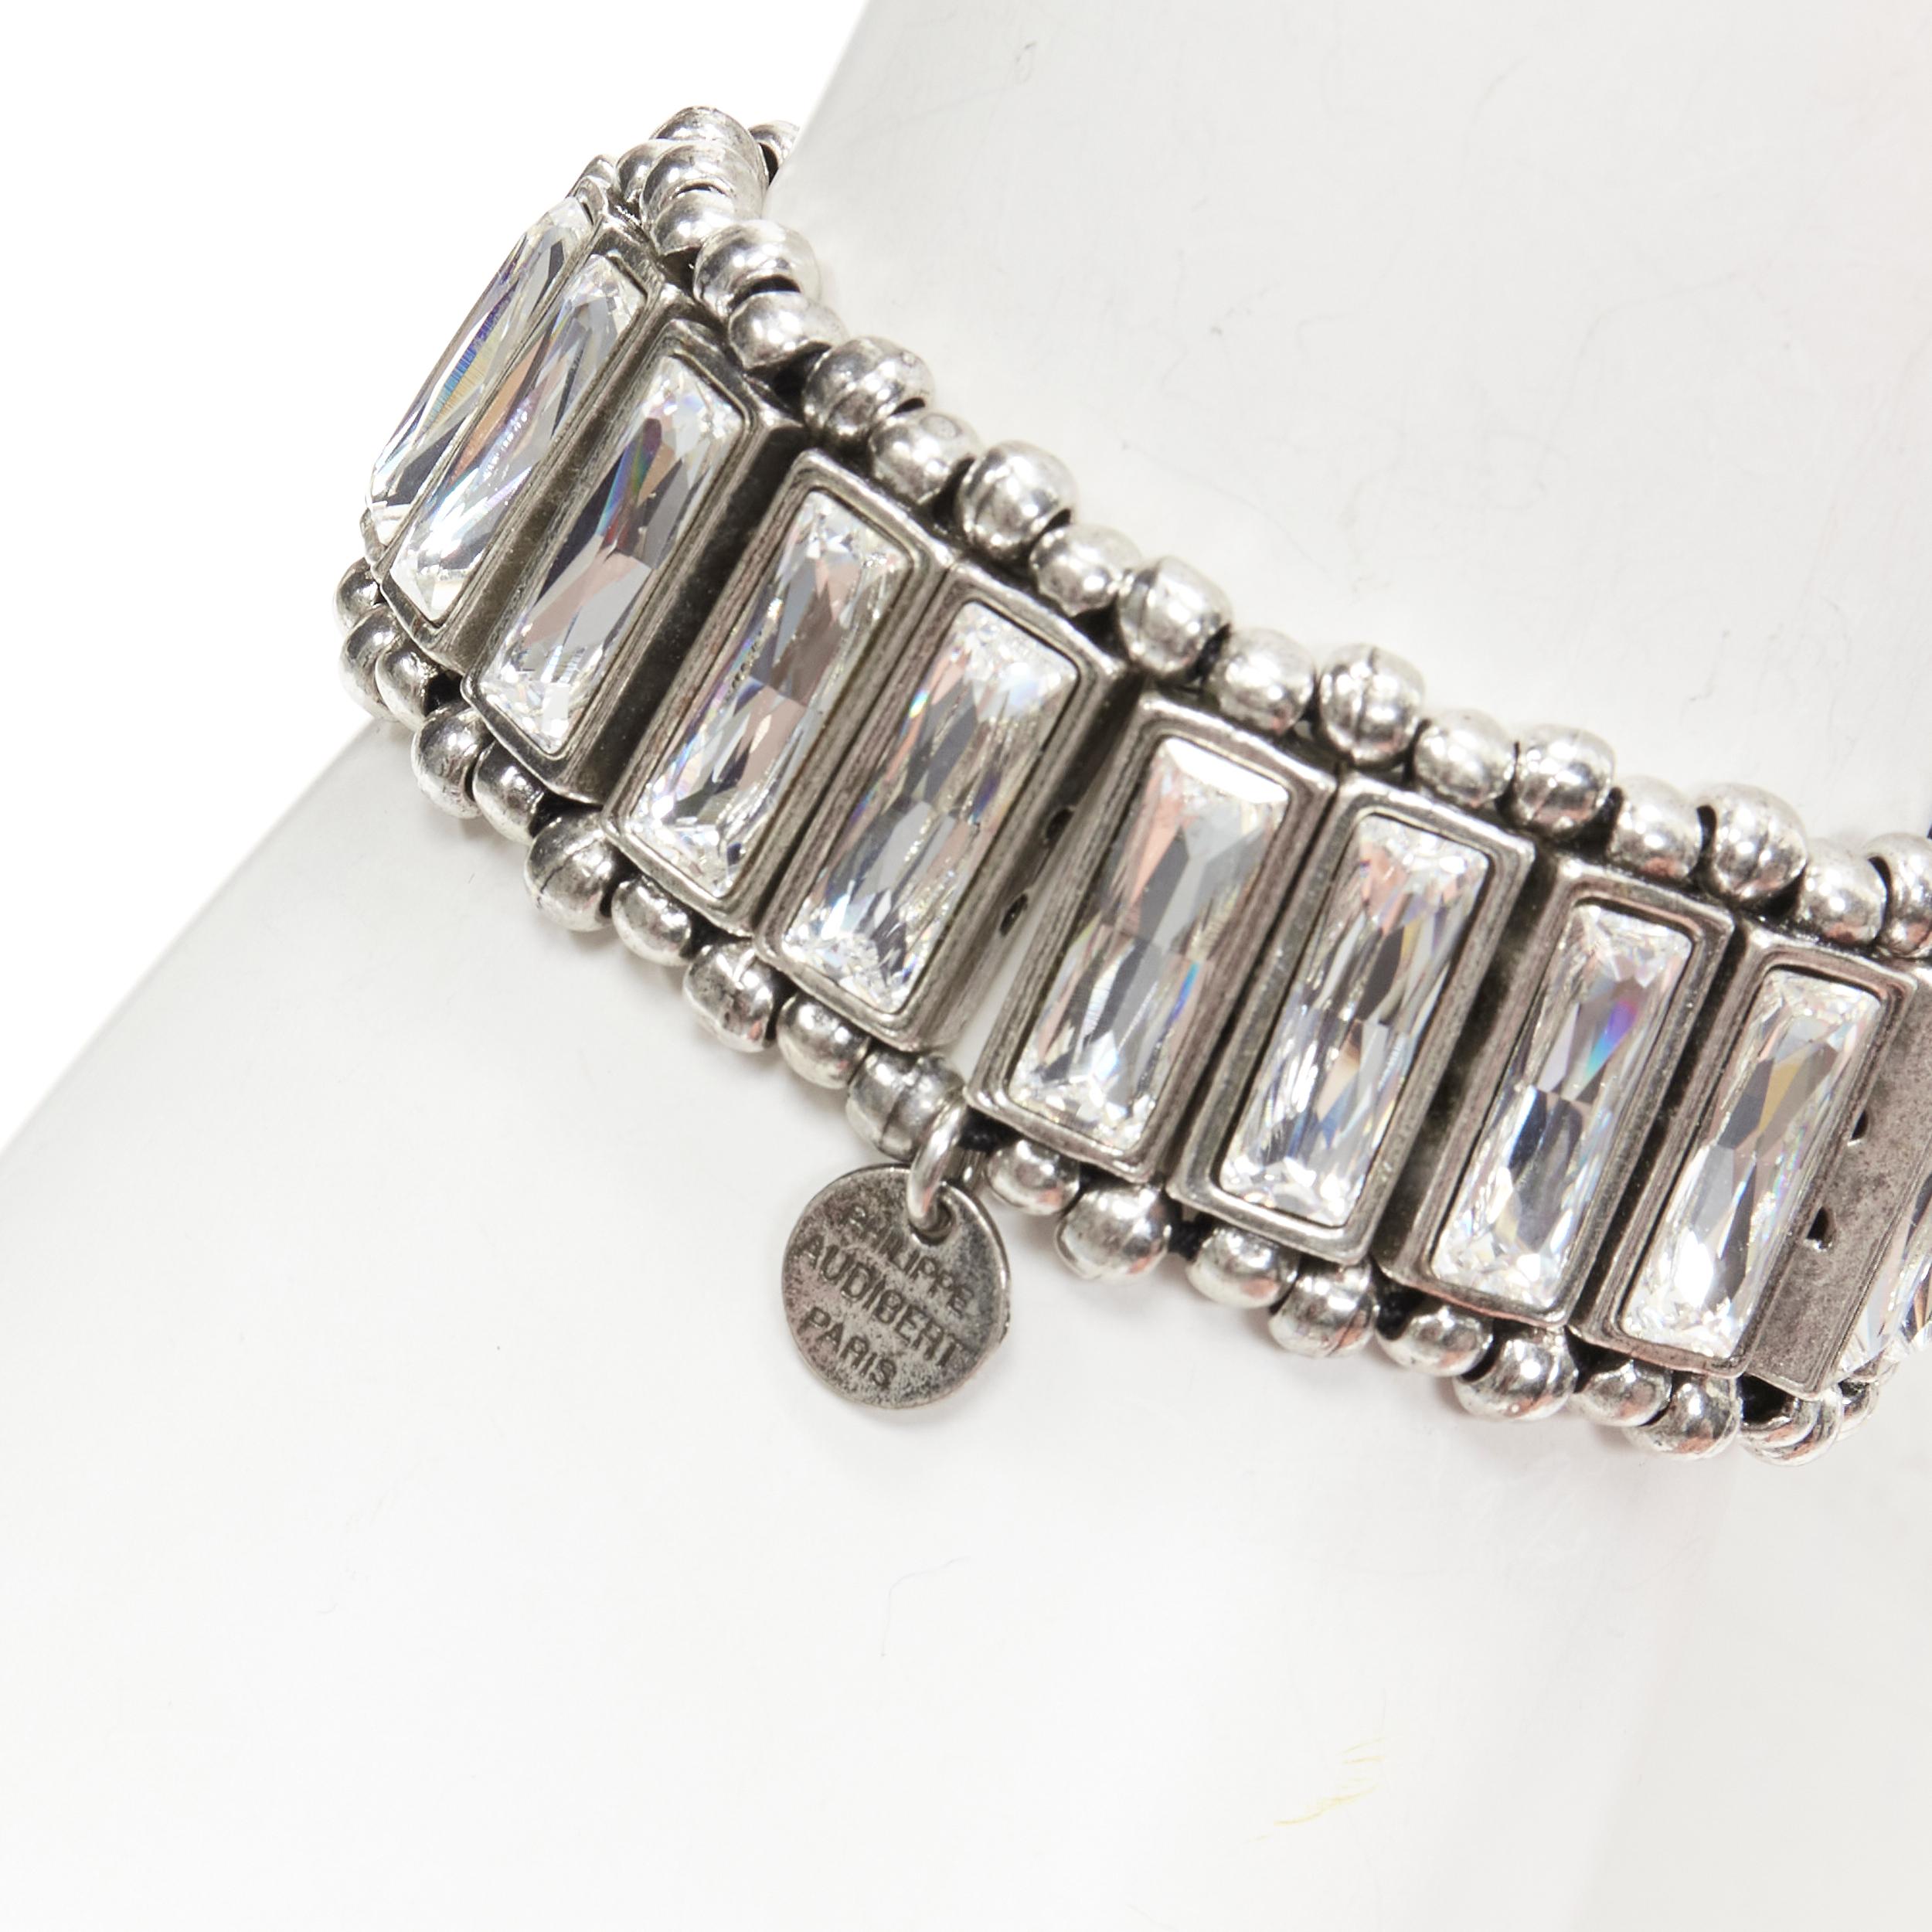 PHILLIPE AUDIBERT antique silver bead baguette crystal elastic bracelet
Reference: ANWU/A00288
Brand: Phillipe Audibert
Material: Metal
Color: Silver
Closure: Elasticated

CONDITION:
Condition: Very good, this item was pre-owned and is in very good